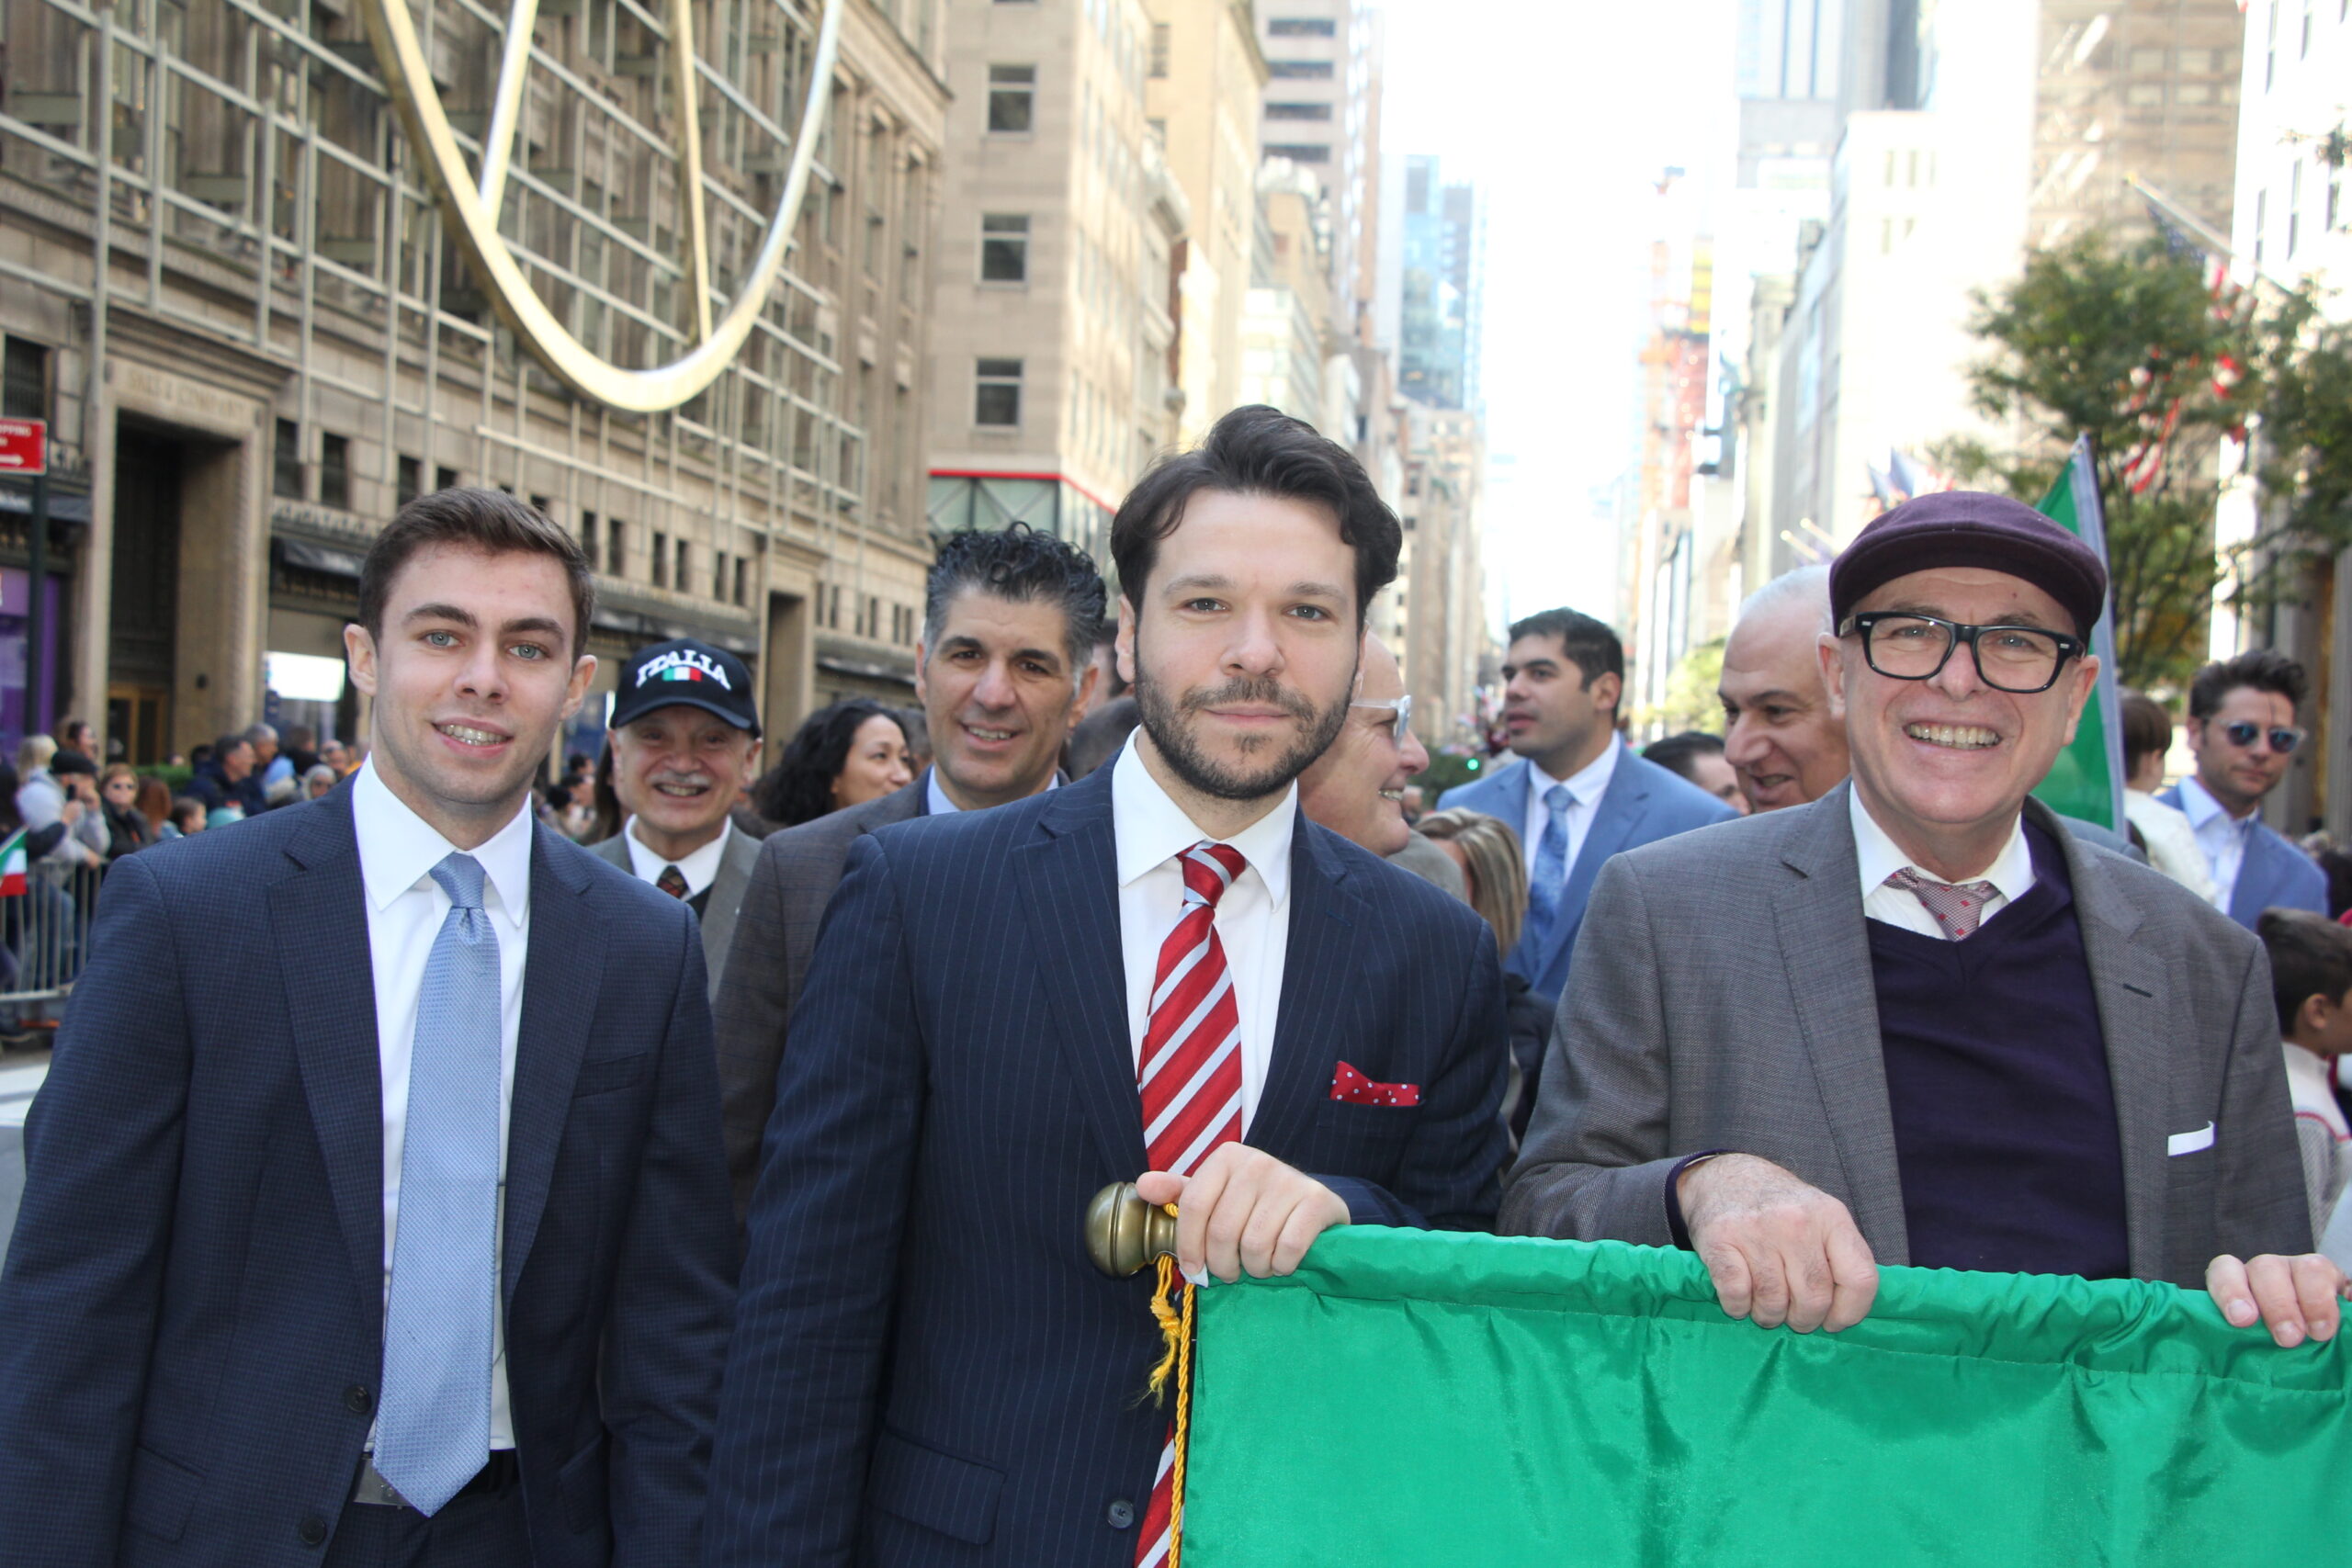 Gianni Tribuzio (center) and Vito Cannavo (right) share a stride, representing the varied faces of Brooklyn's legal sector as they march in the parade.